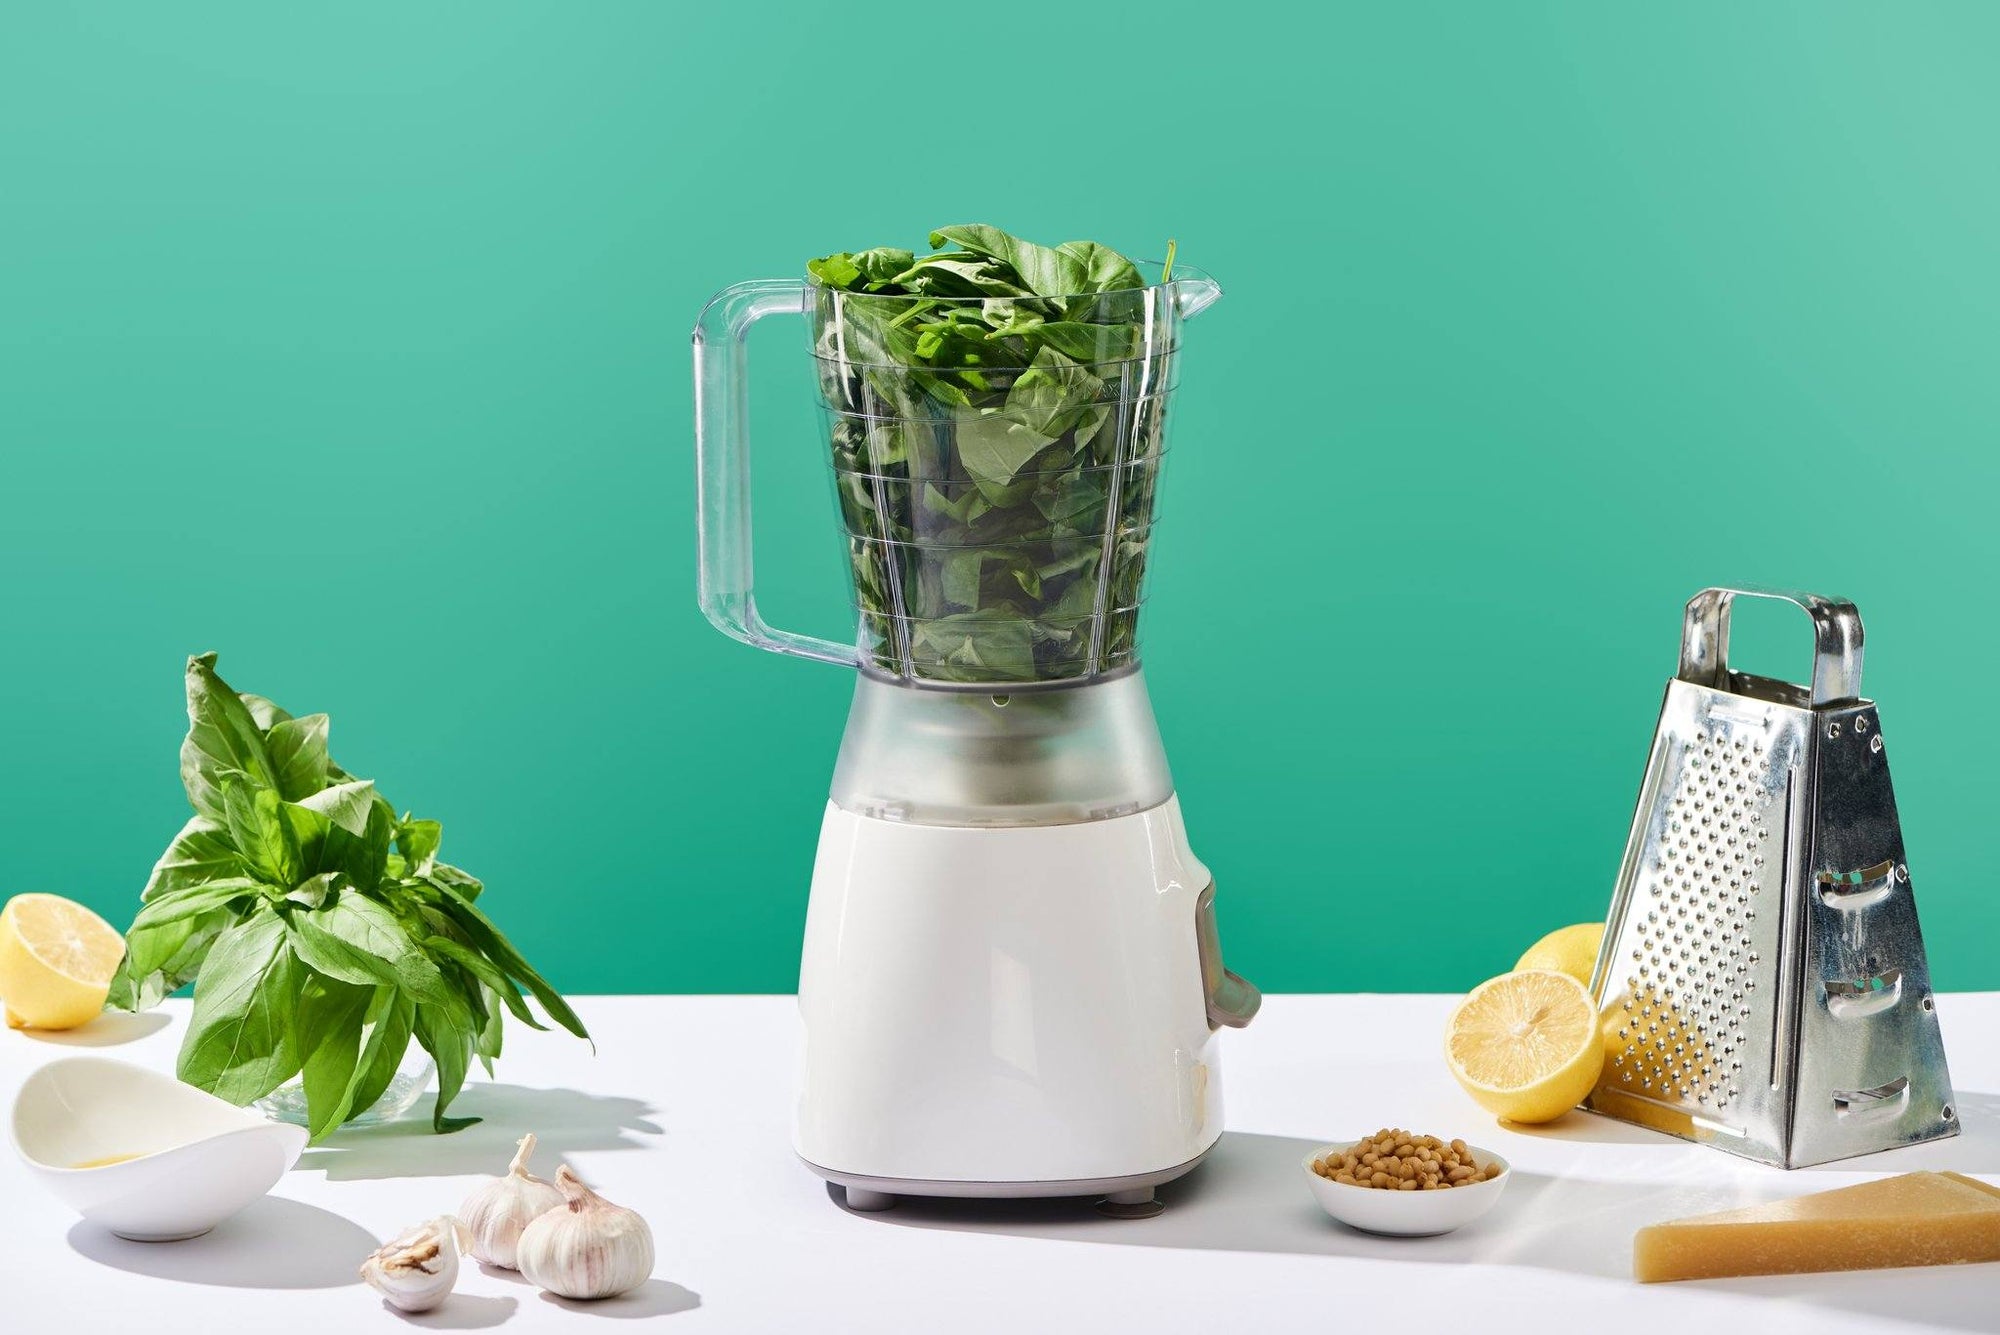 What Is A Food Processor & What Do You Use It For?